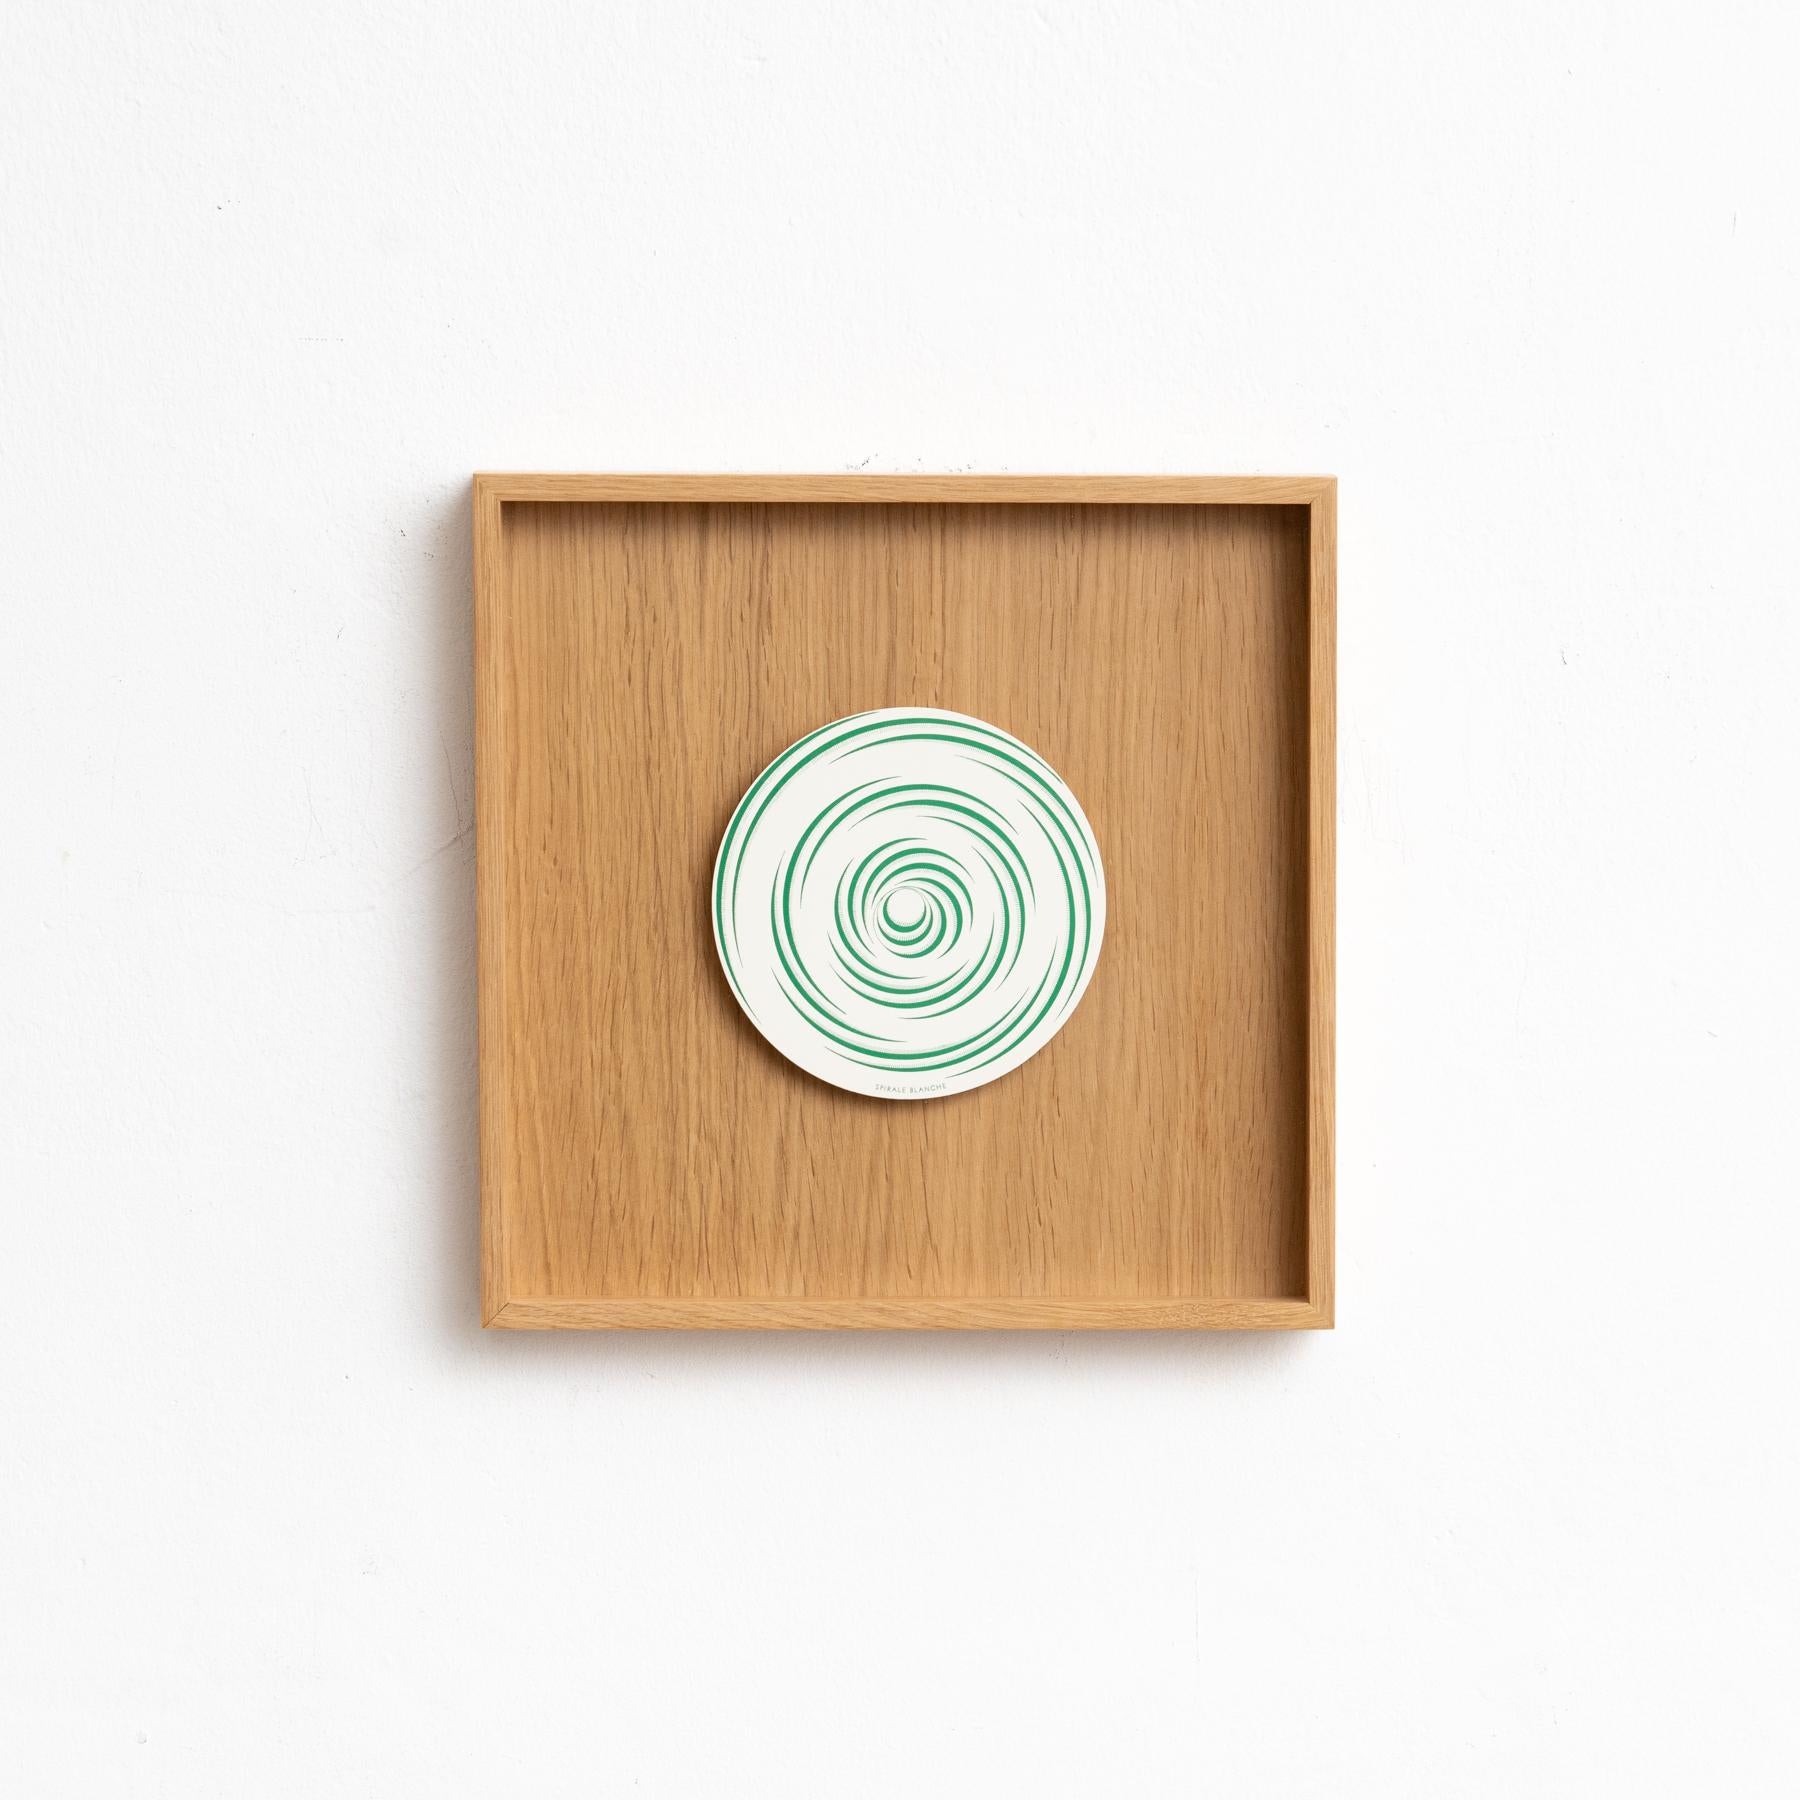 Marcel Duchamp Framed Rotorelief.

Model Spirale Blanche in Green and White

Edited by Walther König Series 133, Germany in 1987.

Framed Artwork in Wood.

In original condition, with minor wear consistent of age and use, preserving a beautiful